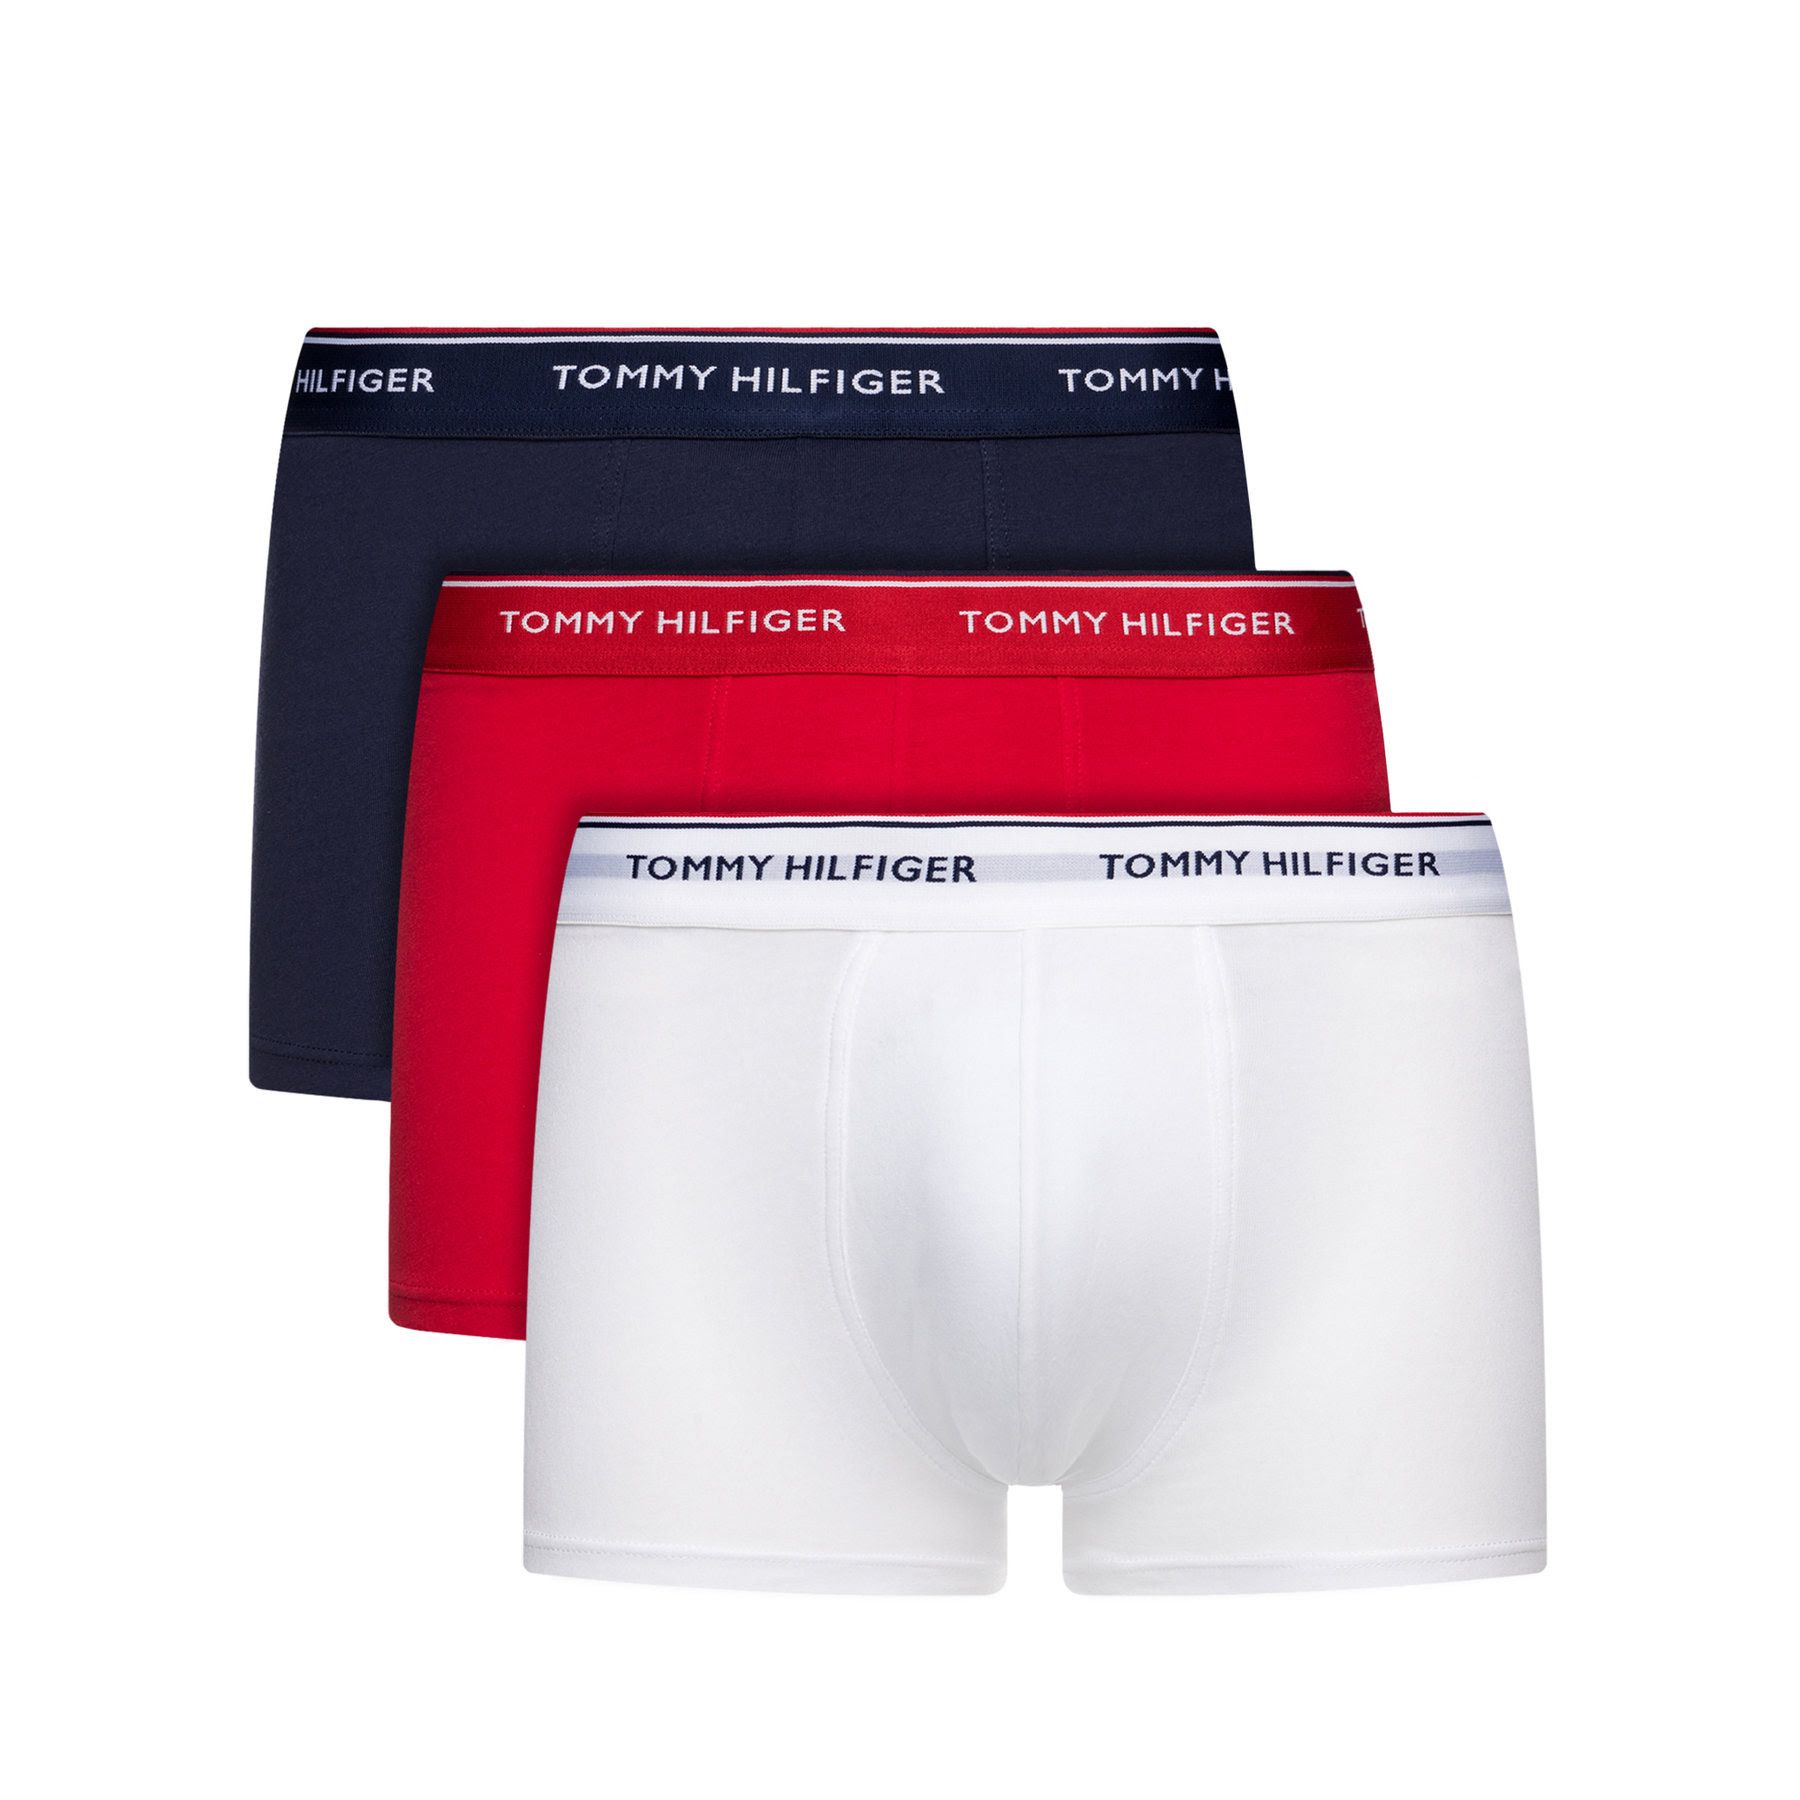 Delivery before Christmas for Tommy Hilfiger NOS Underwear & Loungewear